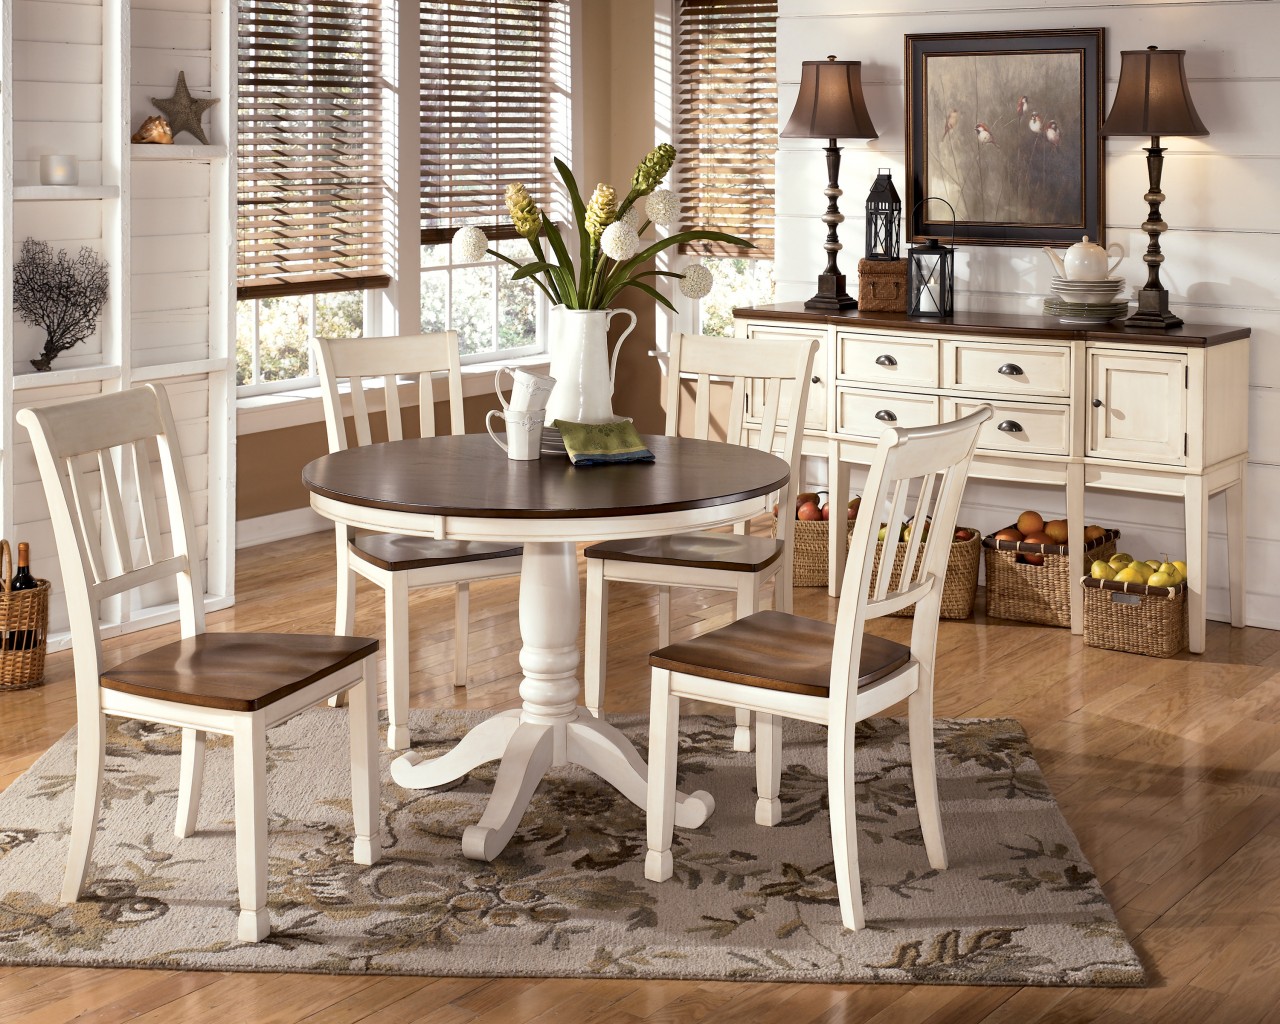 off-white-dining-table-ashley-dining-set-